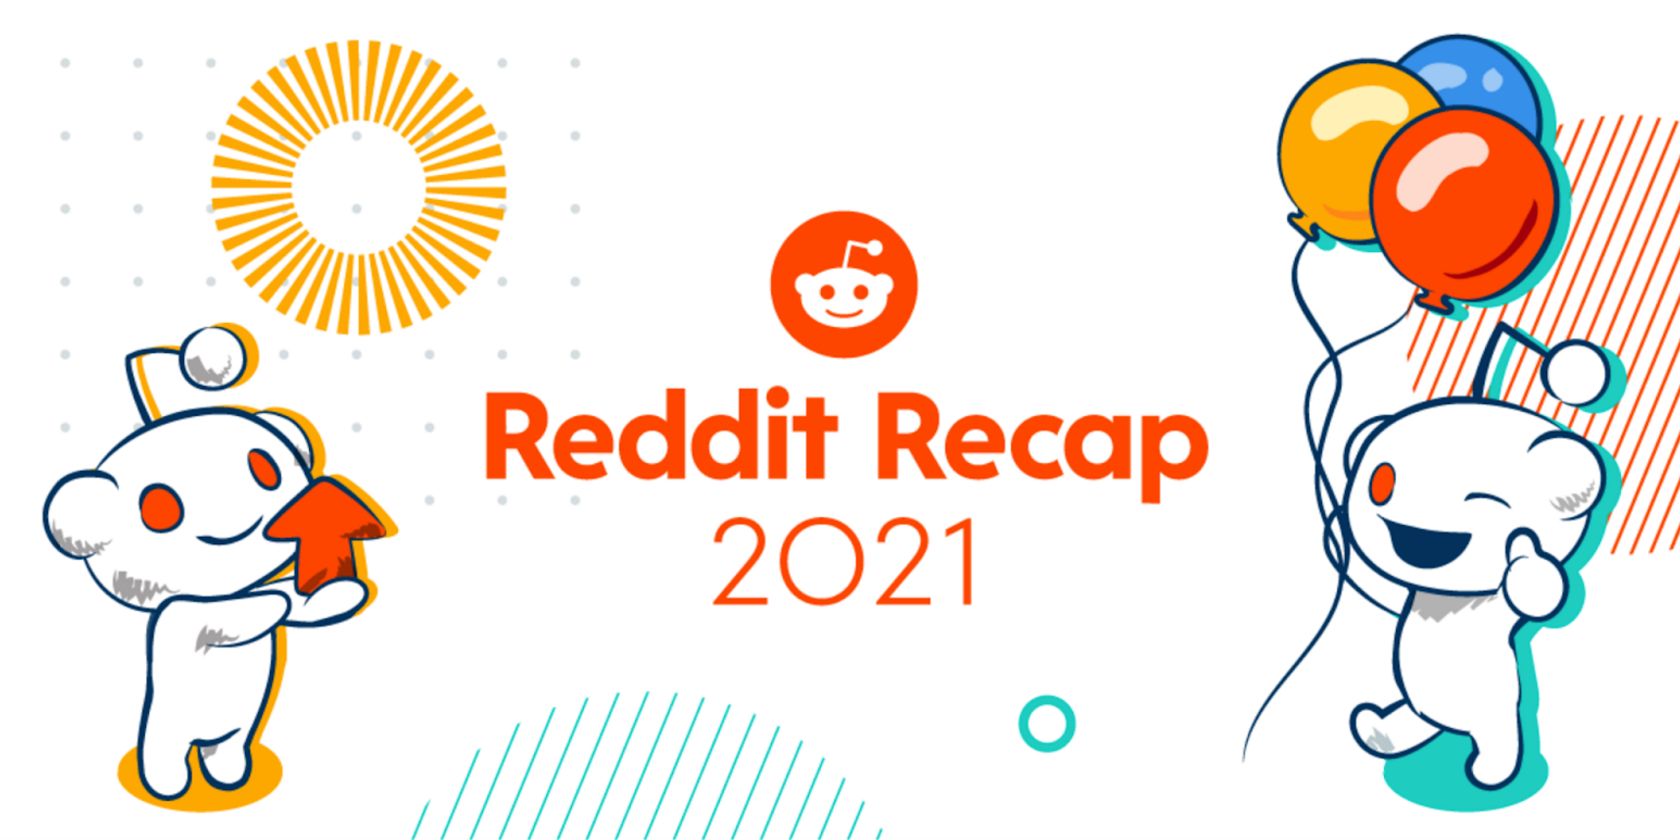 Reddit Launches Reddit Recap 2021 What Were the Most Notable Moments?